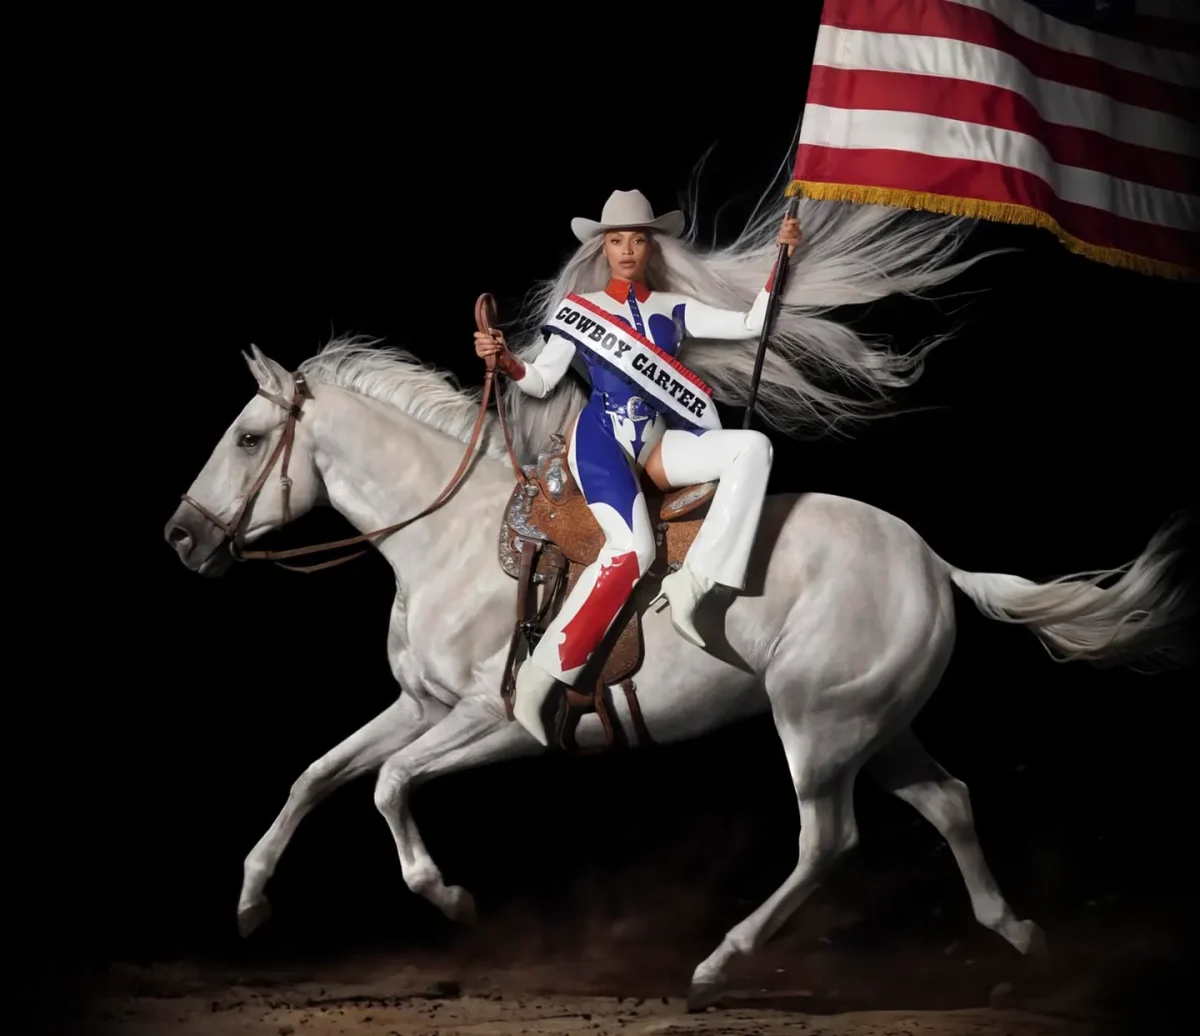 The album cover for Cowboy Carter features Beyonce on a white horse in full patriotic display. (Courtesy of Columbia Records)